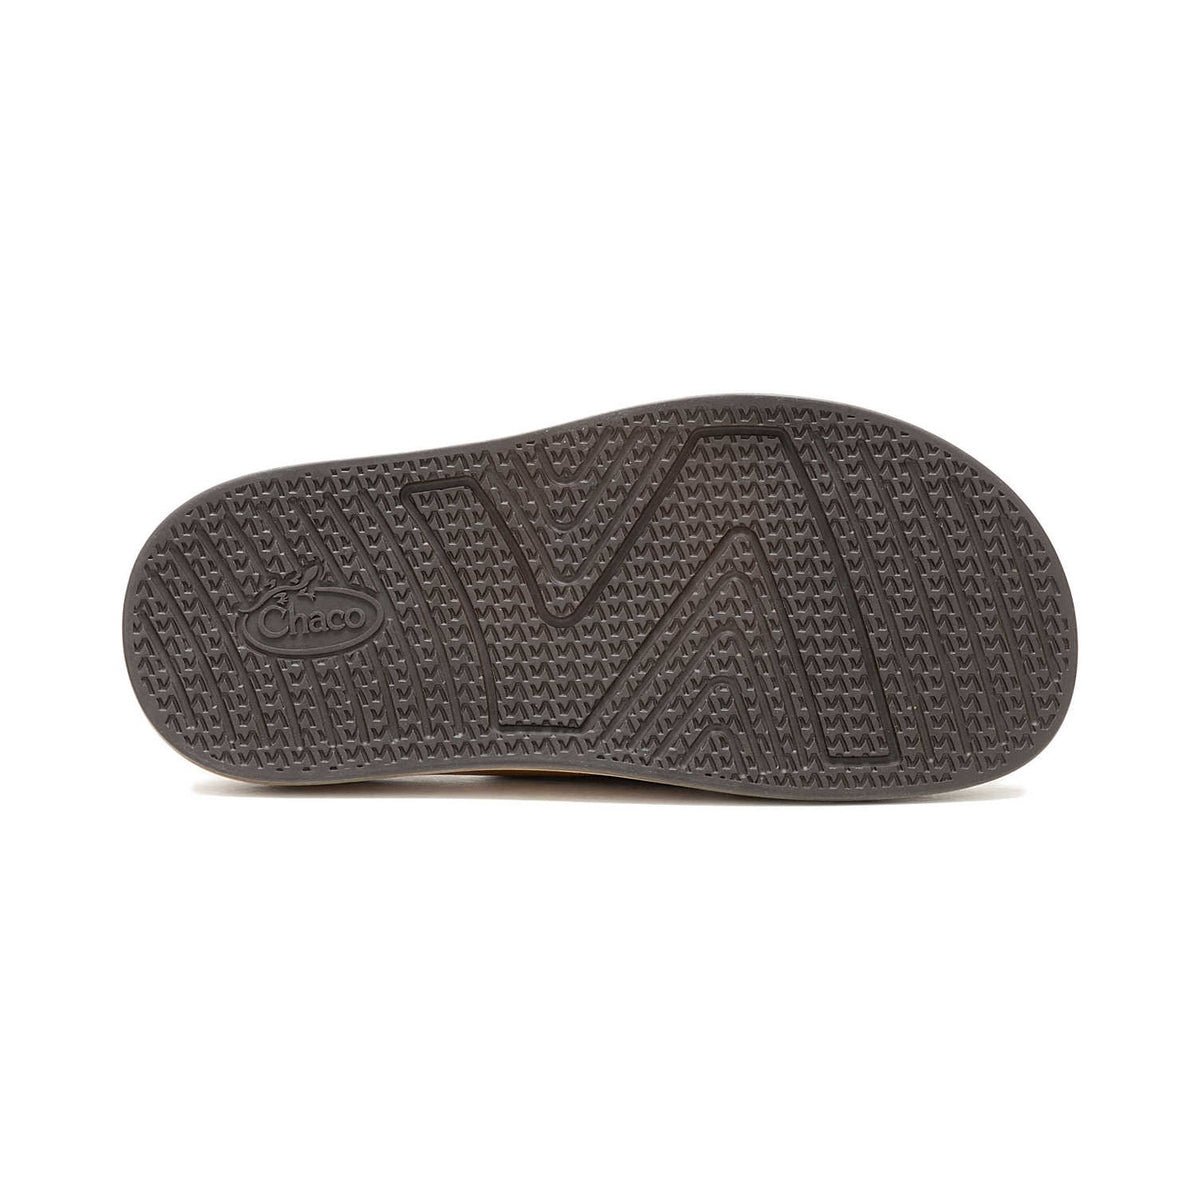 A close-up view of the textured sole of a Chaco townes slide cashew shoe with LUVSEAT footbed, displaying a distinctive zigzag tread pattern.